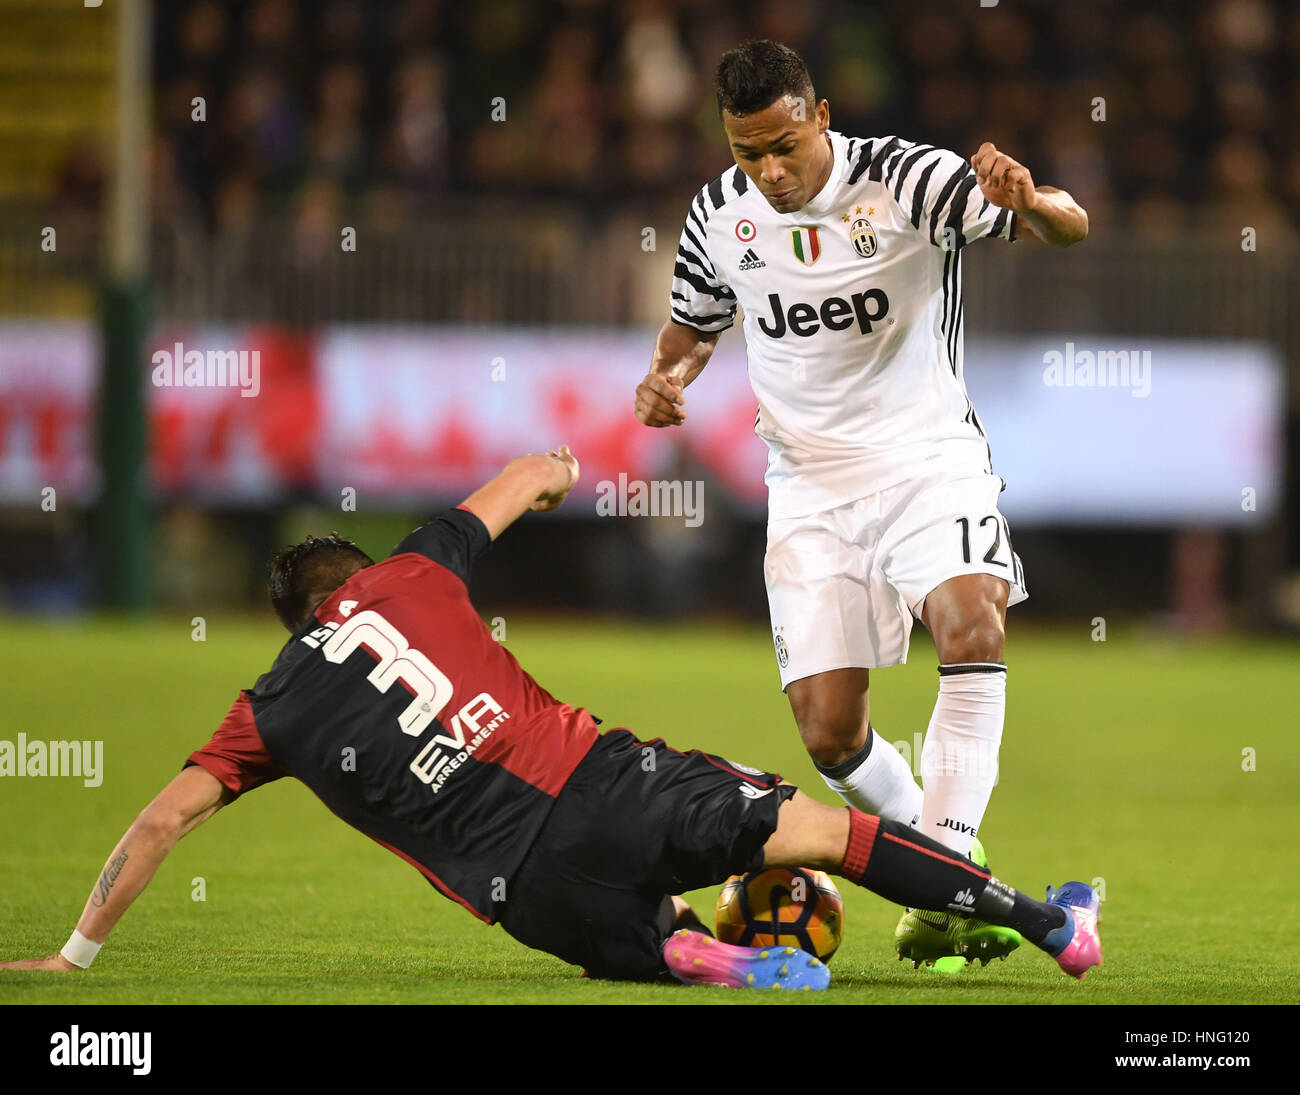 Cagliari, Italy. 12th Feb, 2017. Cagliari's Mauricio Isla(L) vies with Juventus' Alex Sandro during the Serie A soccer match between Juventus and Cagliari, in Cagliari, Italy, Feb. 12, 2017. Juventus won 2-0. Credit: Alberto Lingria/Xinhua/Alamy Live News Stock Photo